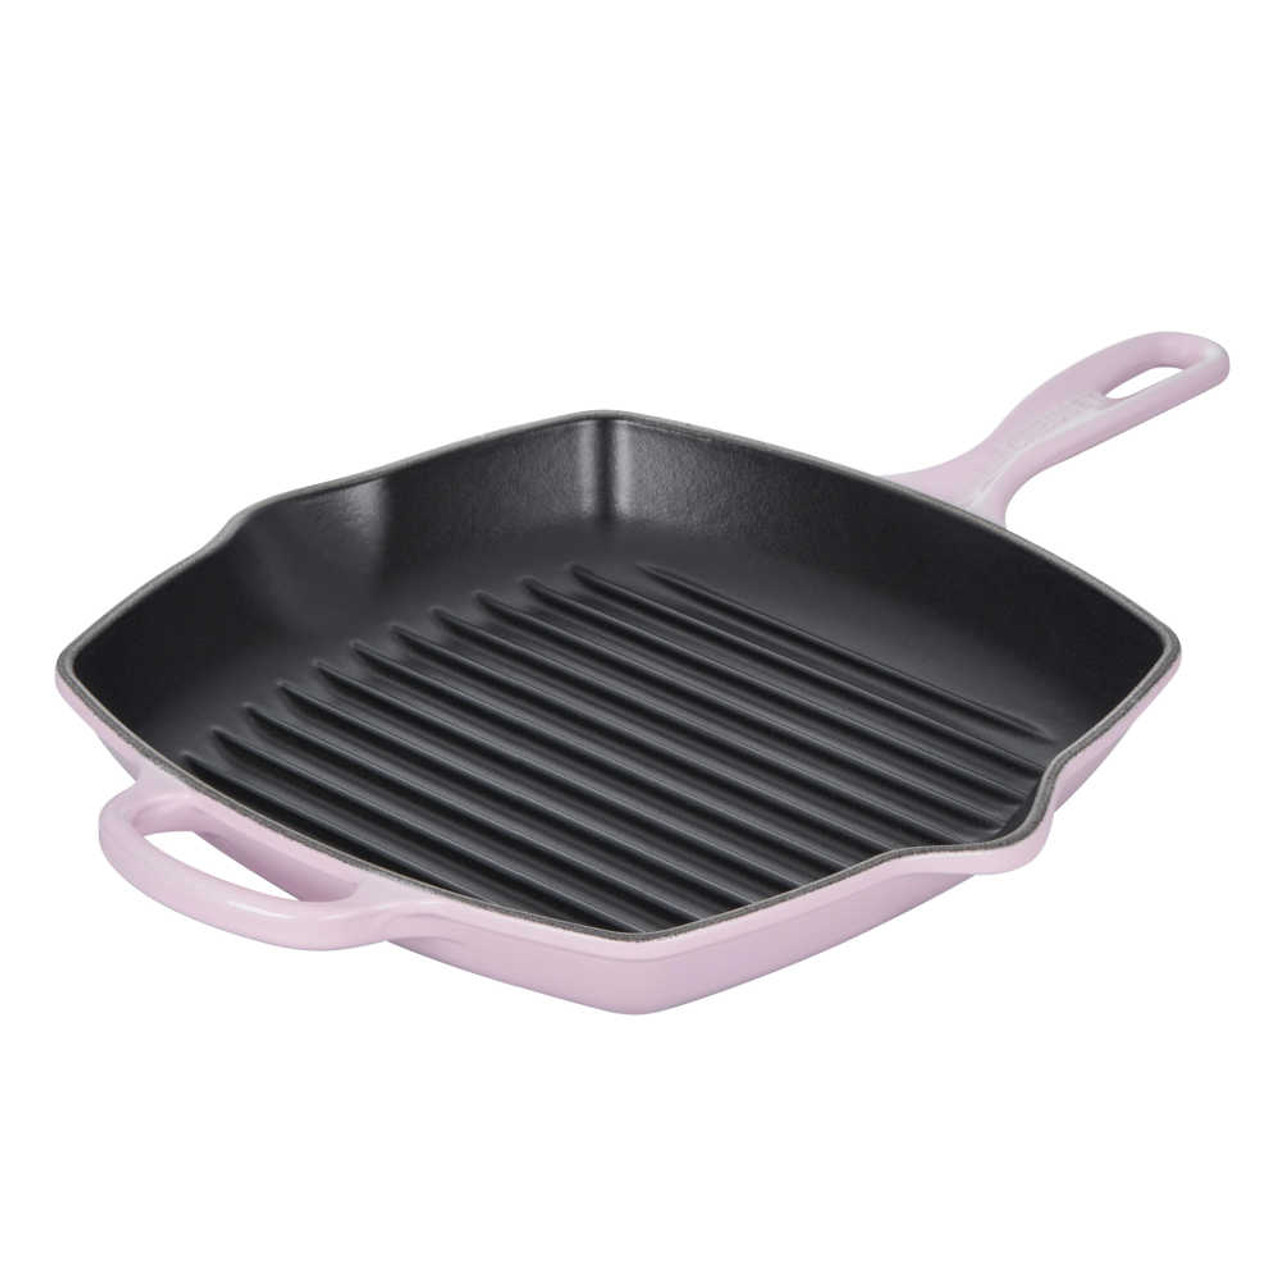 Le Creuset Signature Square Skillet Grill in Shallot